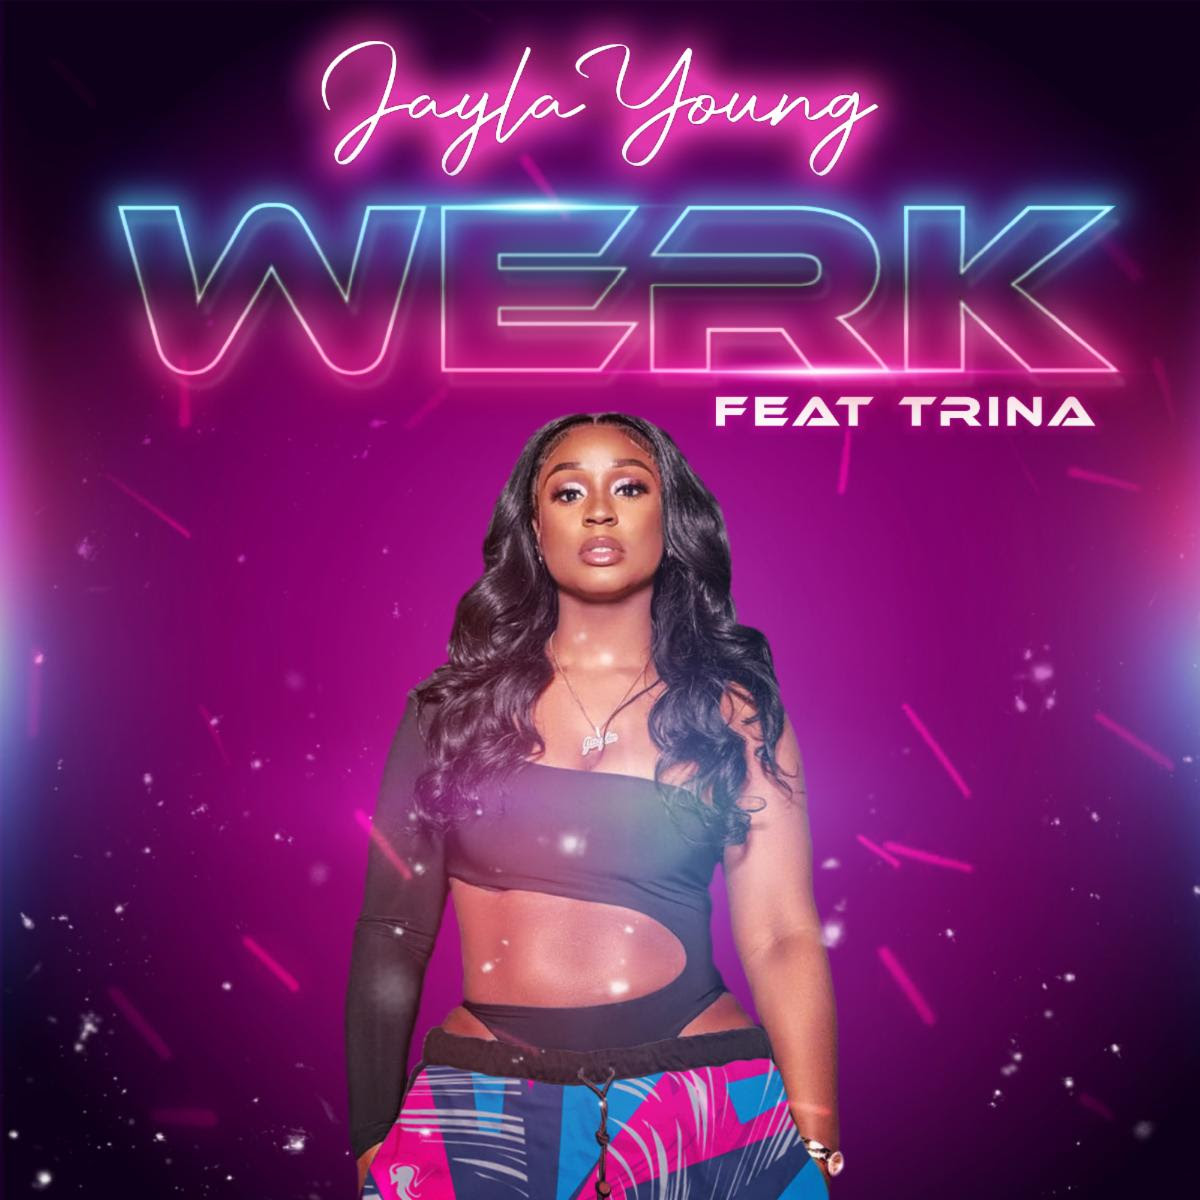 Art for Werk (Clean) by Jayla Young feat. Trina